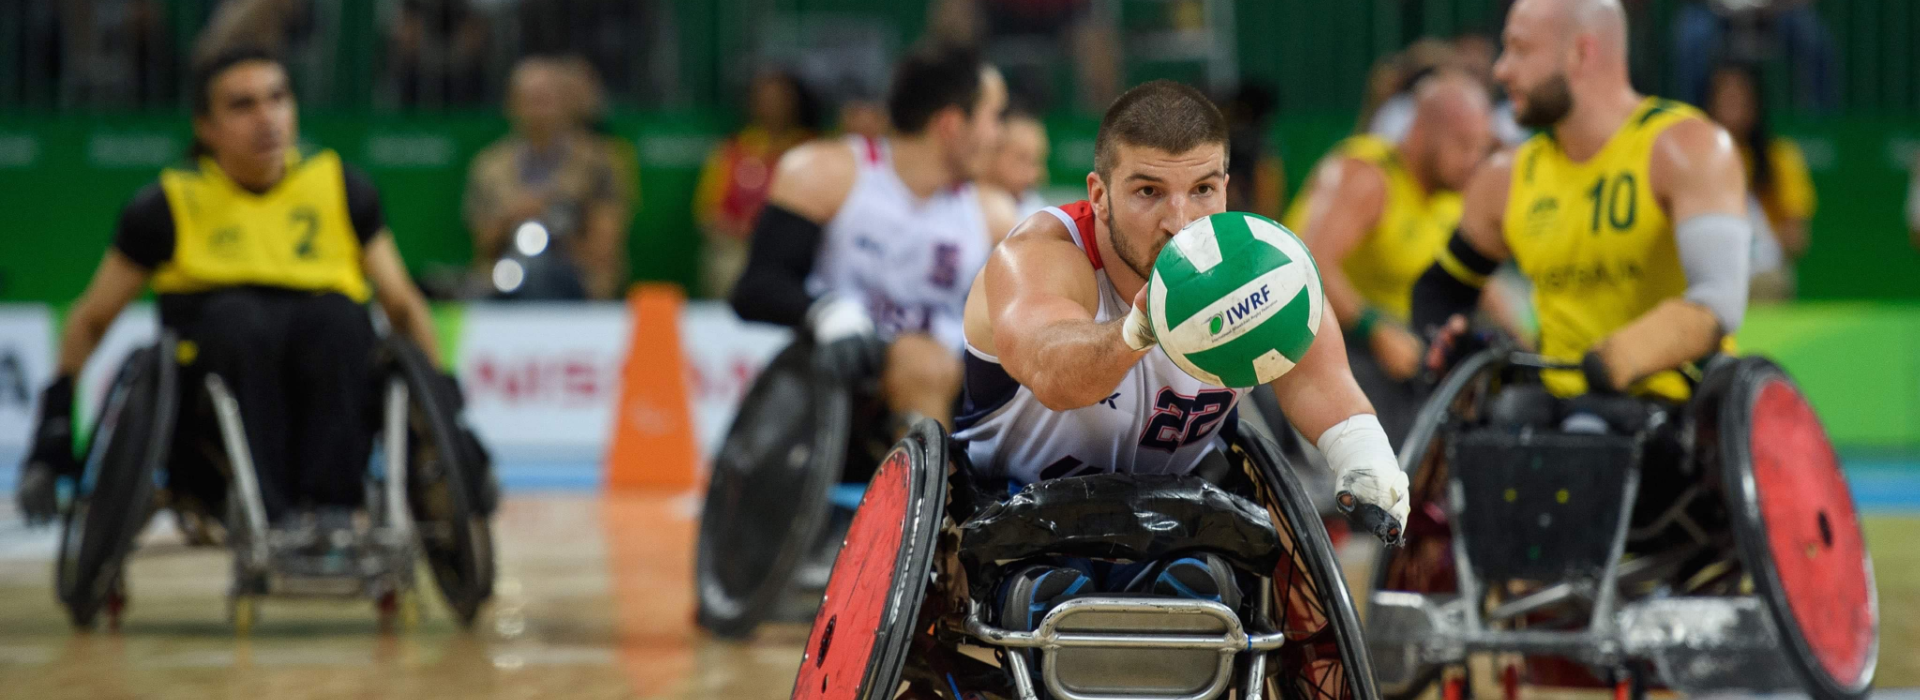 Kory Puderbaugh playing Wheelchair Rugby with rugby ball in hand